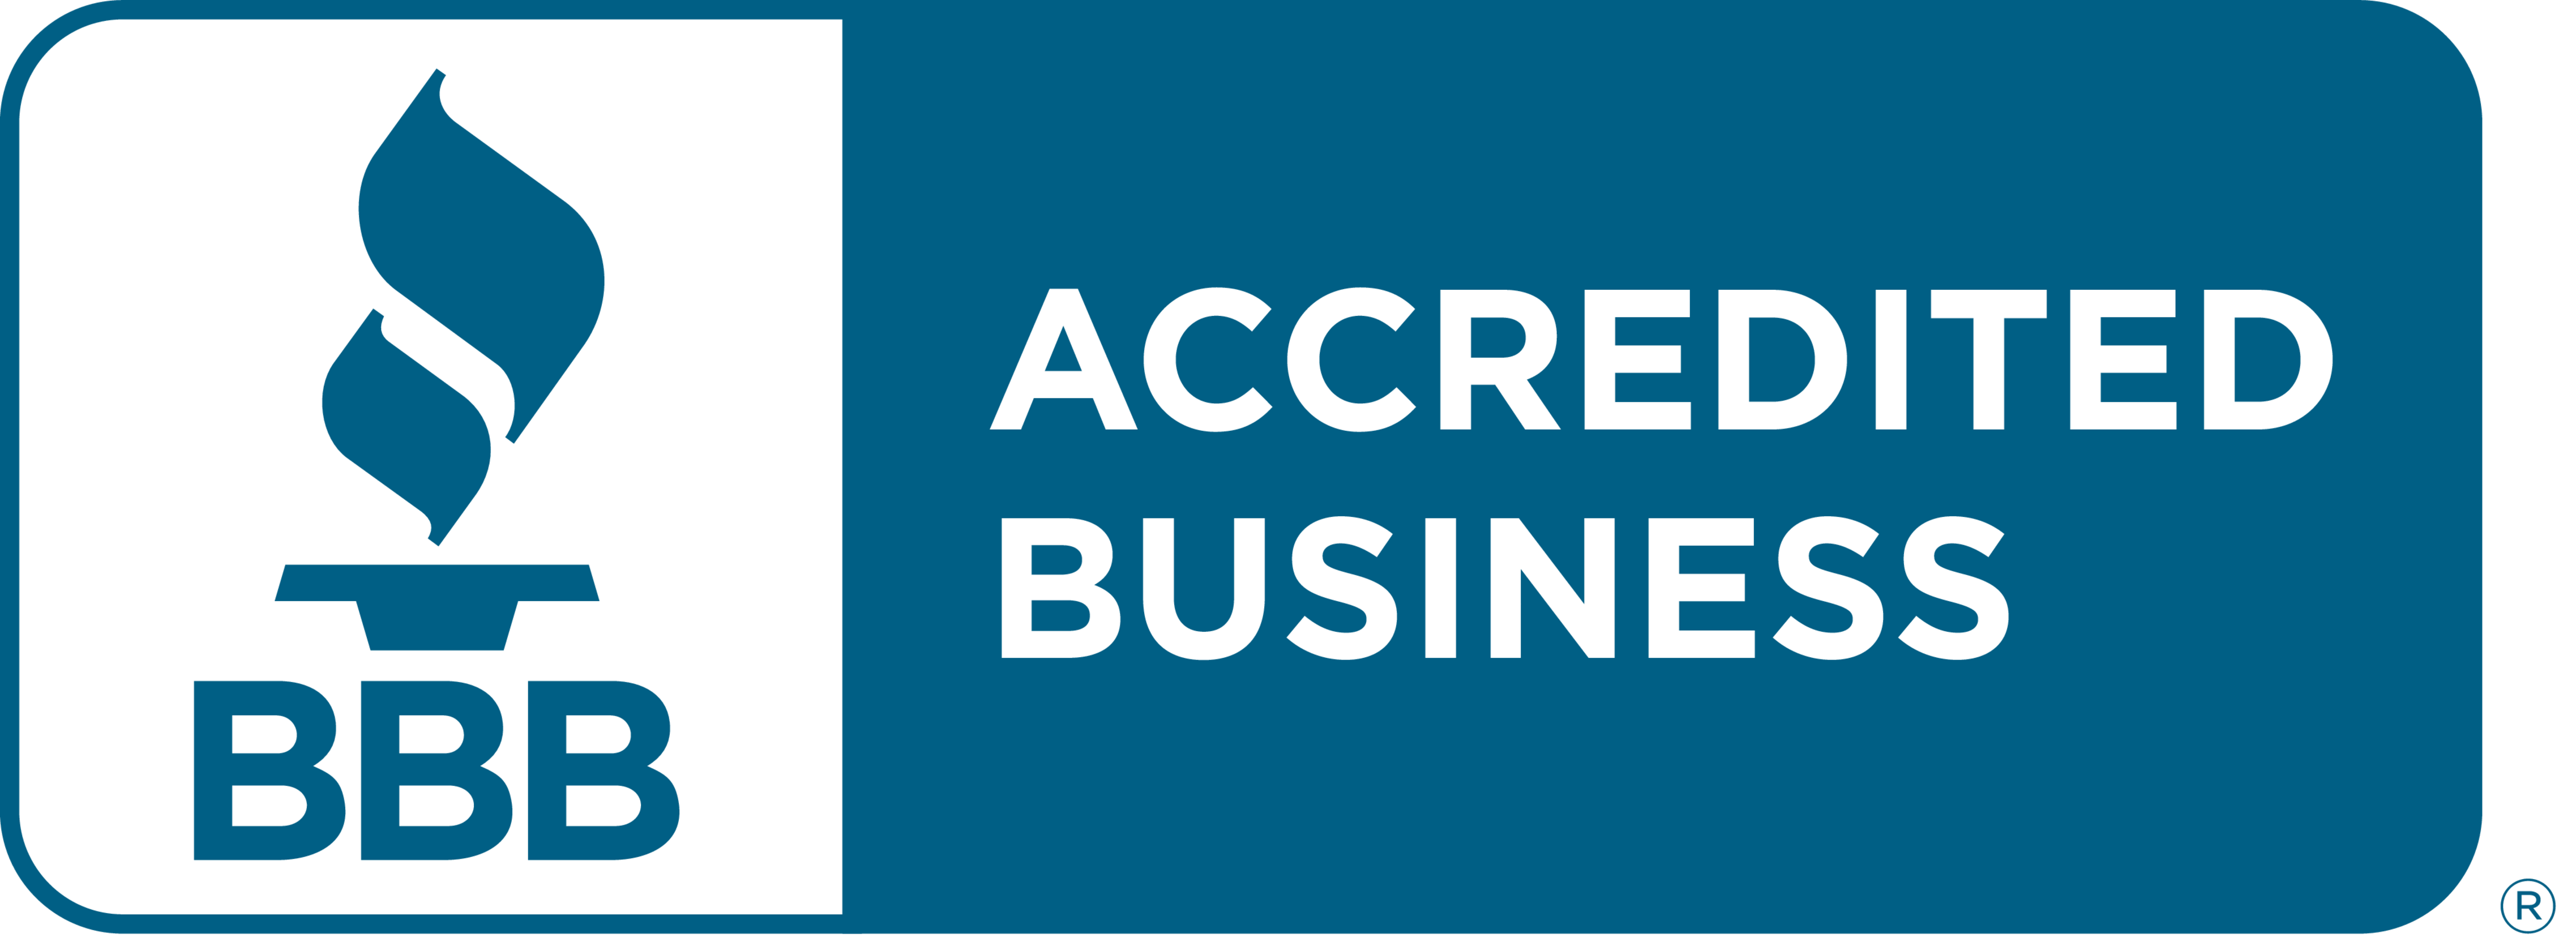 BBB Seal of Accreditation